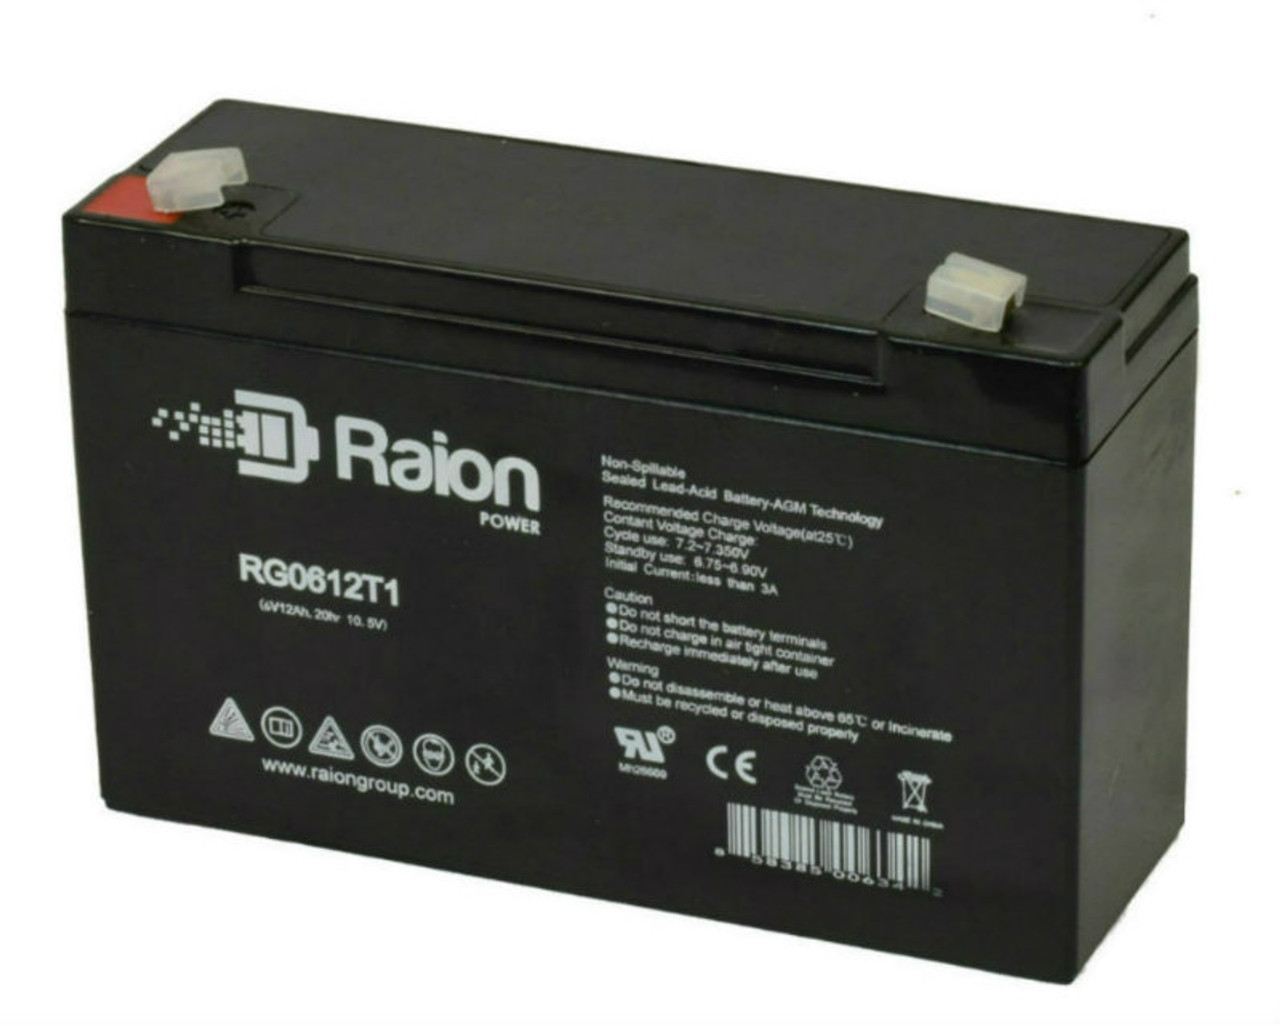 Raion Power RG06120T1 Replacement Emergency Light Battery for ELS BLJR